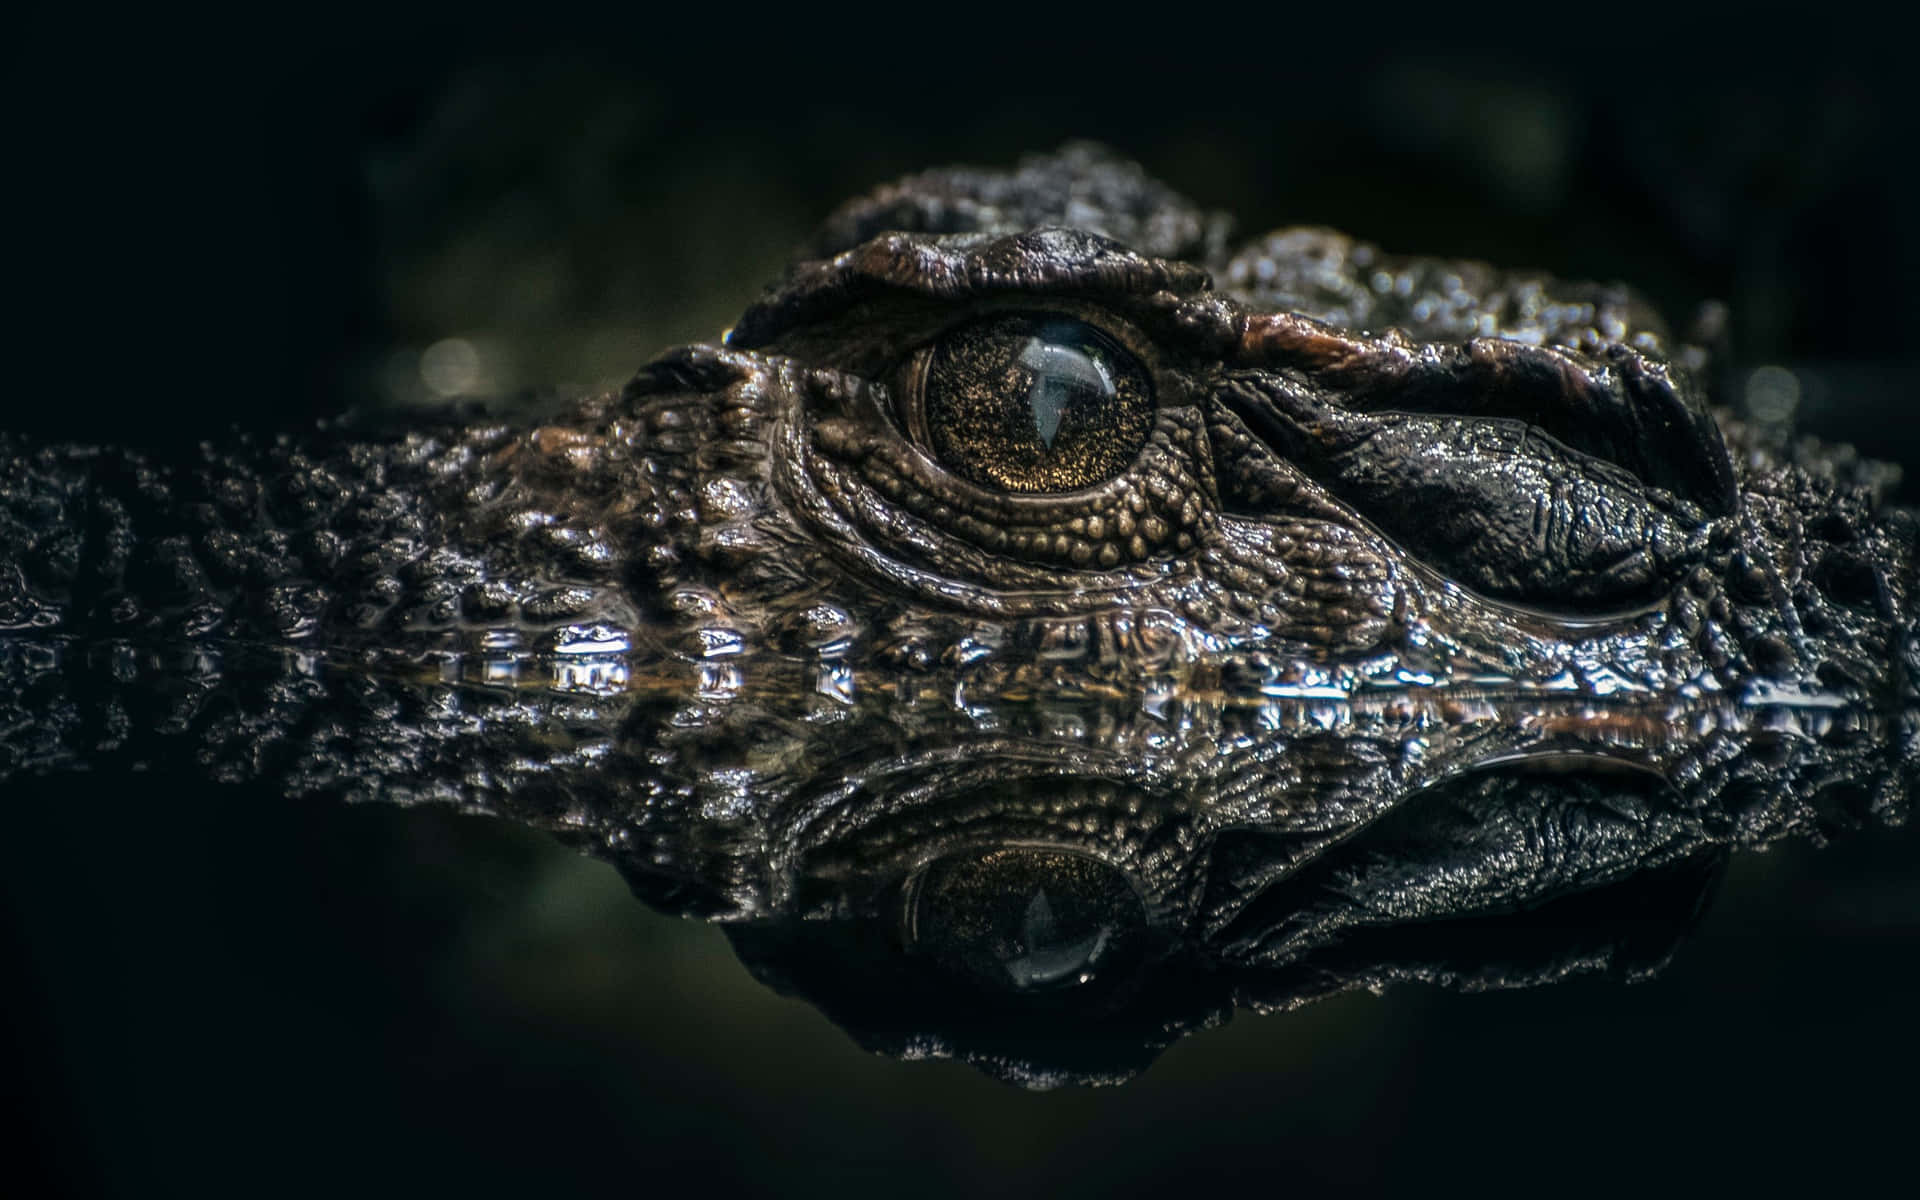 A closeup of an alligator's head on a cold winters day.